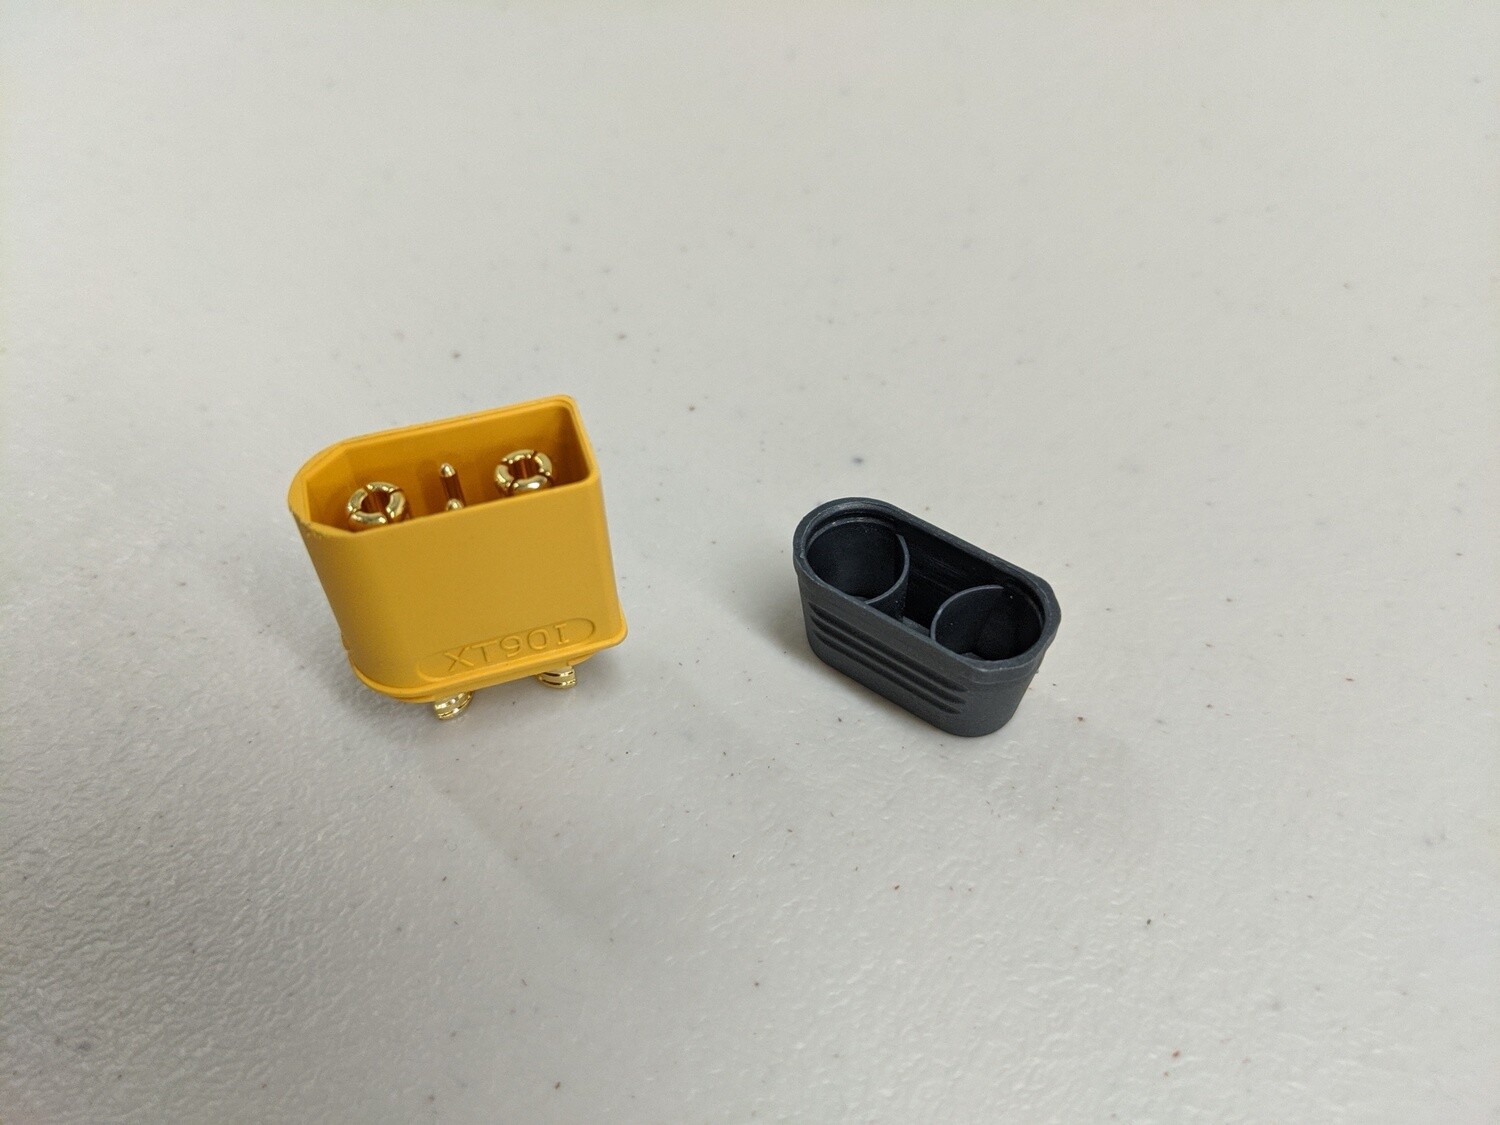 XT90I connector for power and data